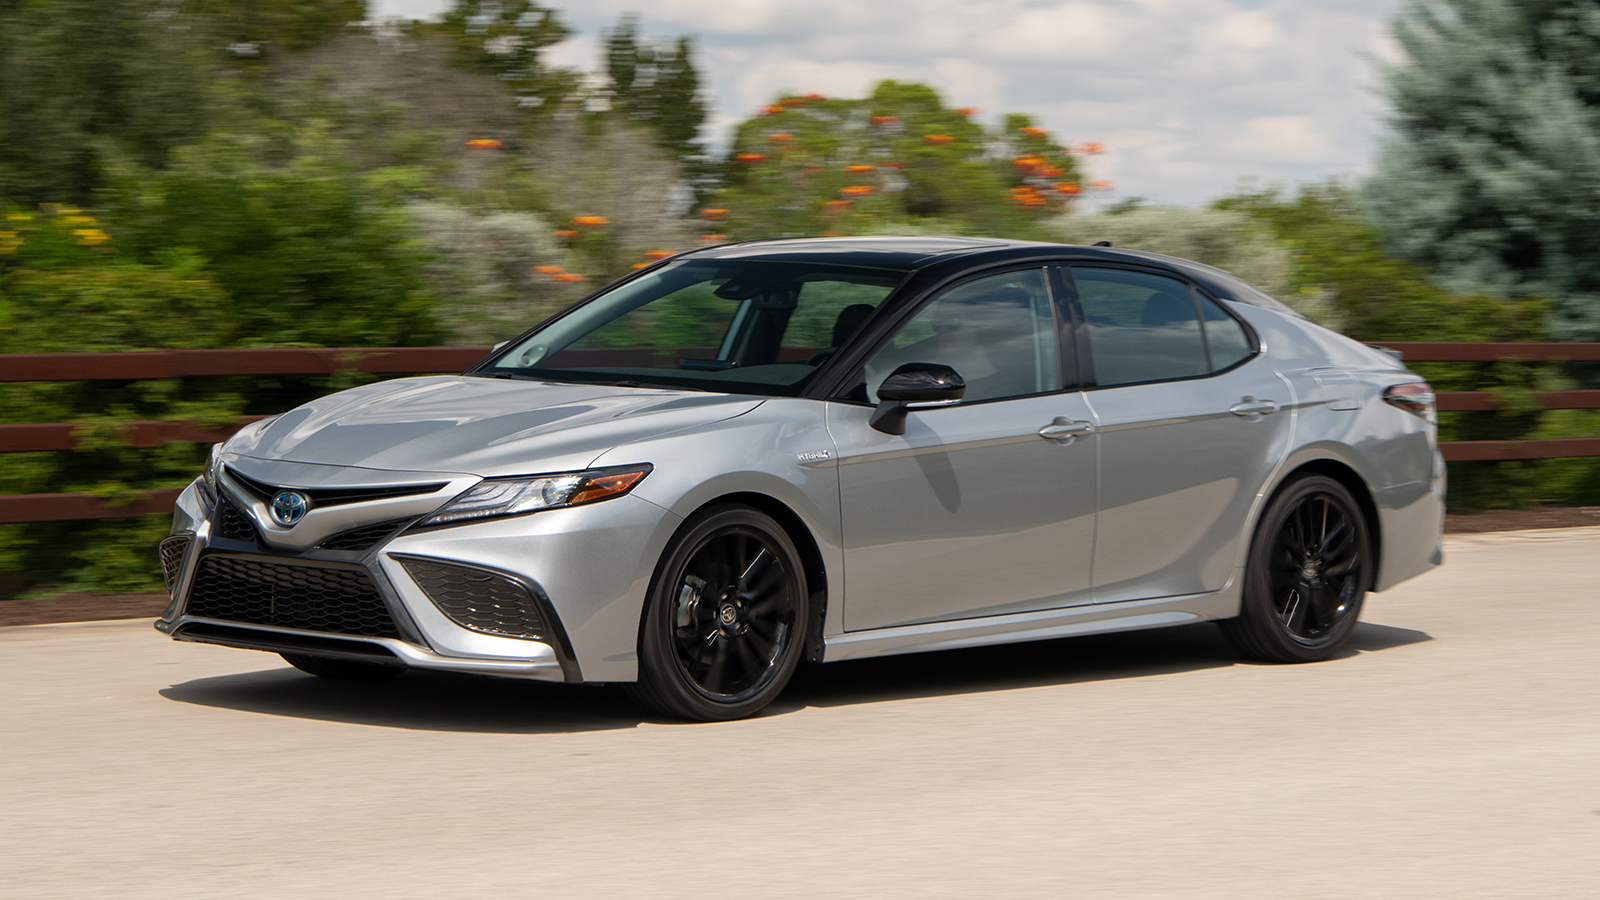 2021 Toyota Camry Review | What's new, pictures, hybrid and AWD fuel ...